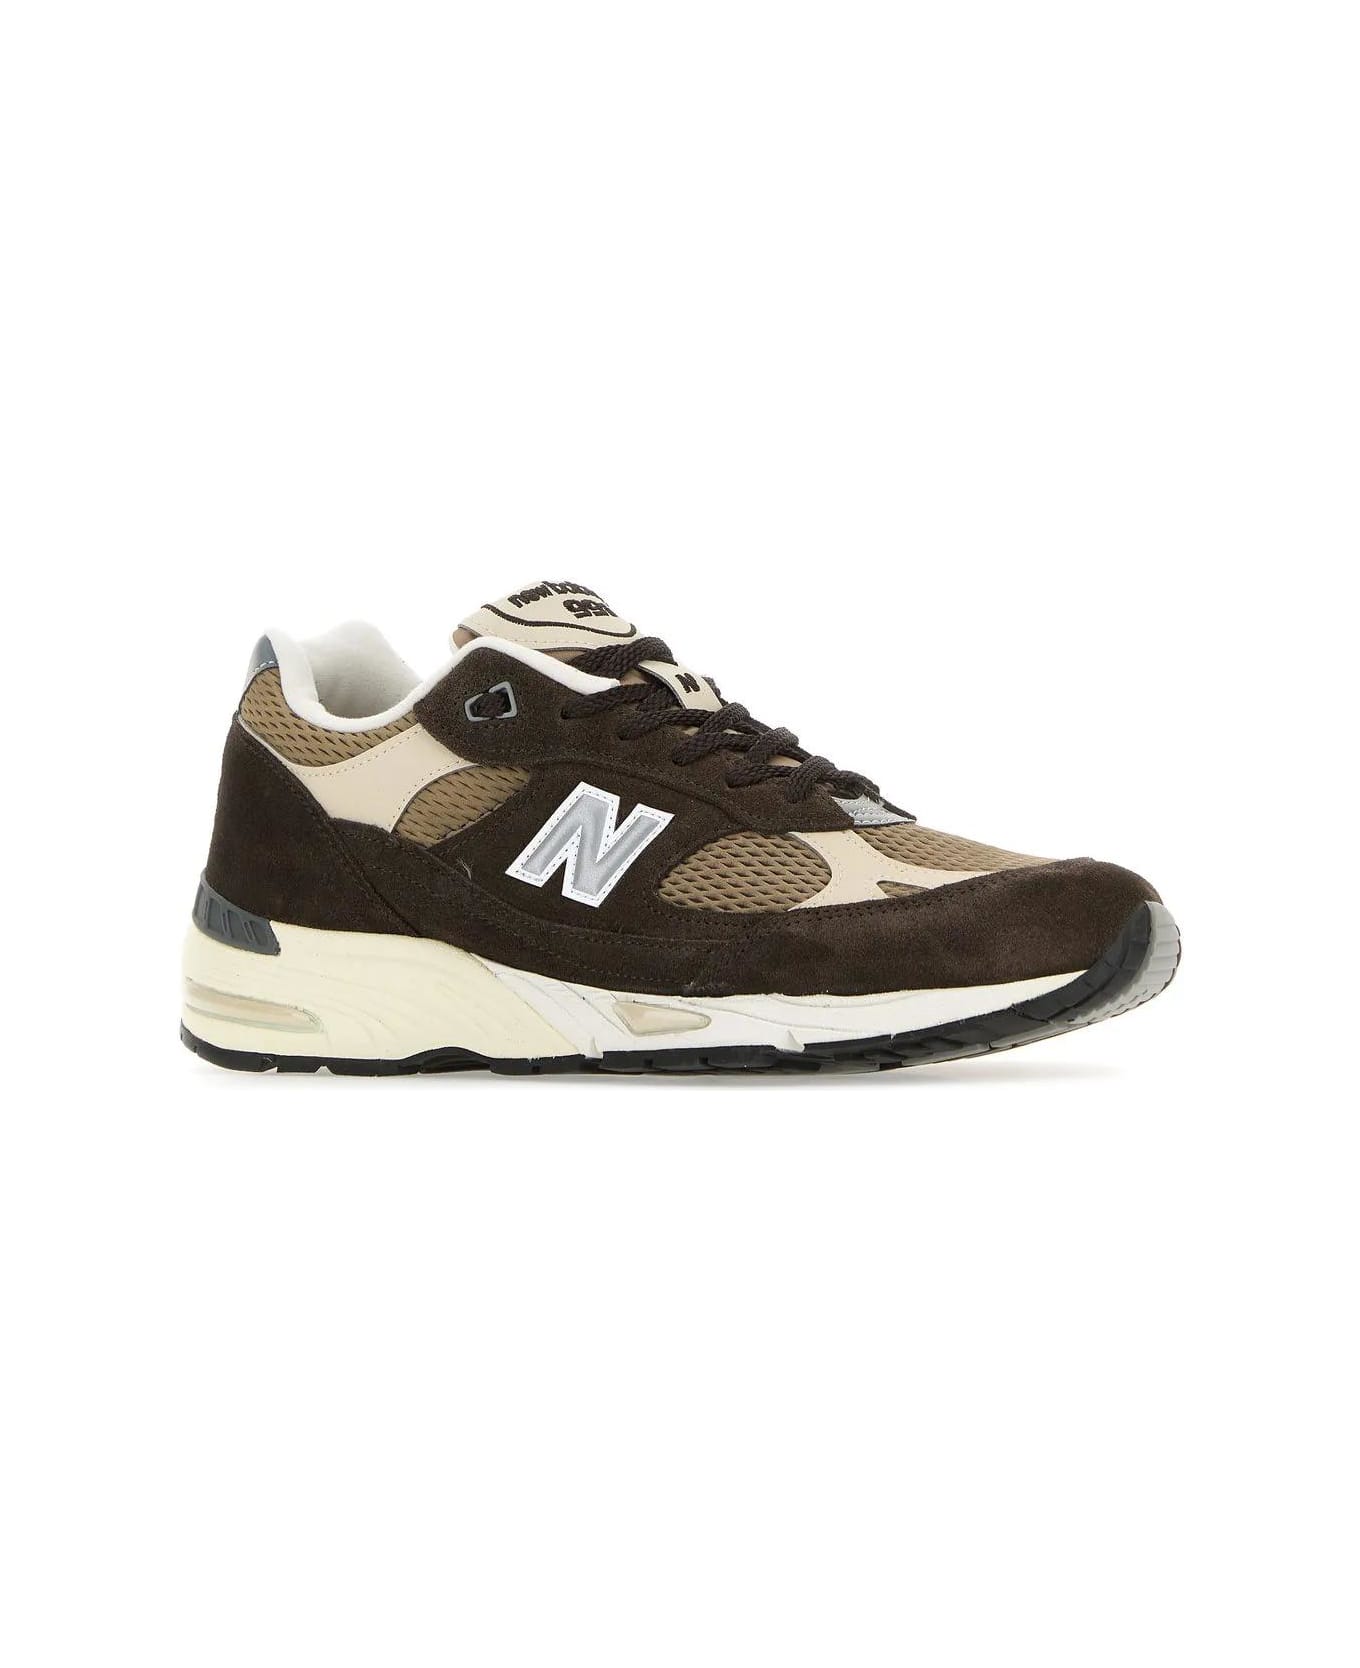 New Balance Brown Suede And Mesh 991v1 Sneakers - BROWN/NEUTRALS スニーカー